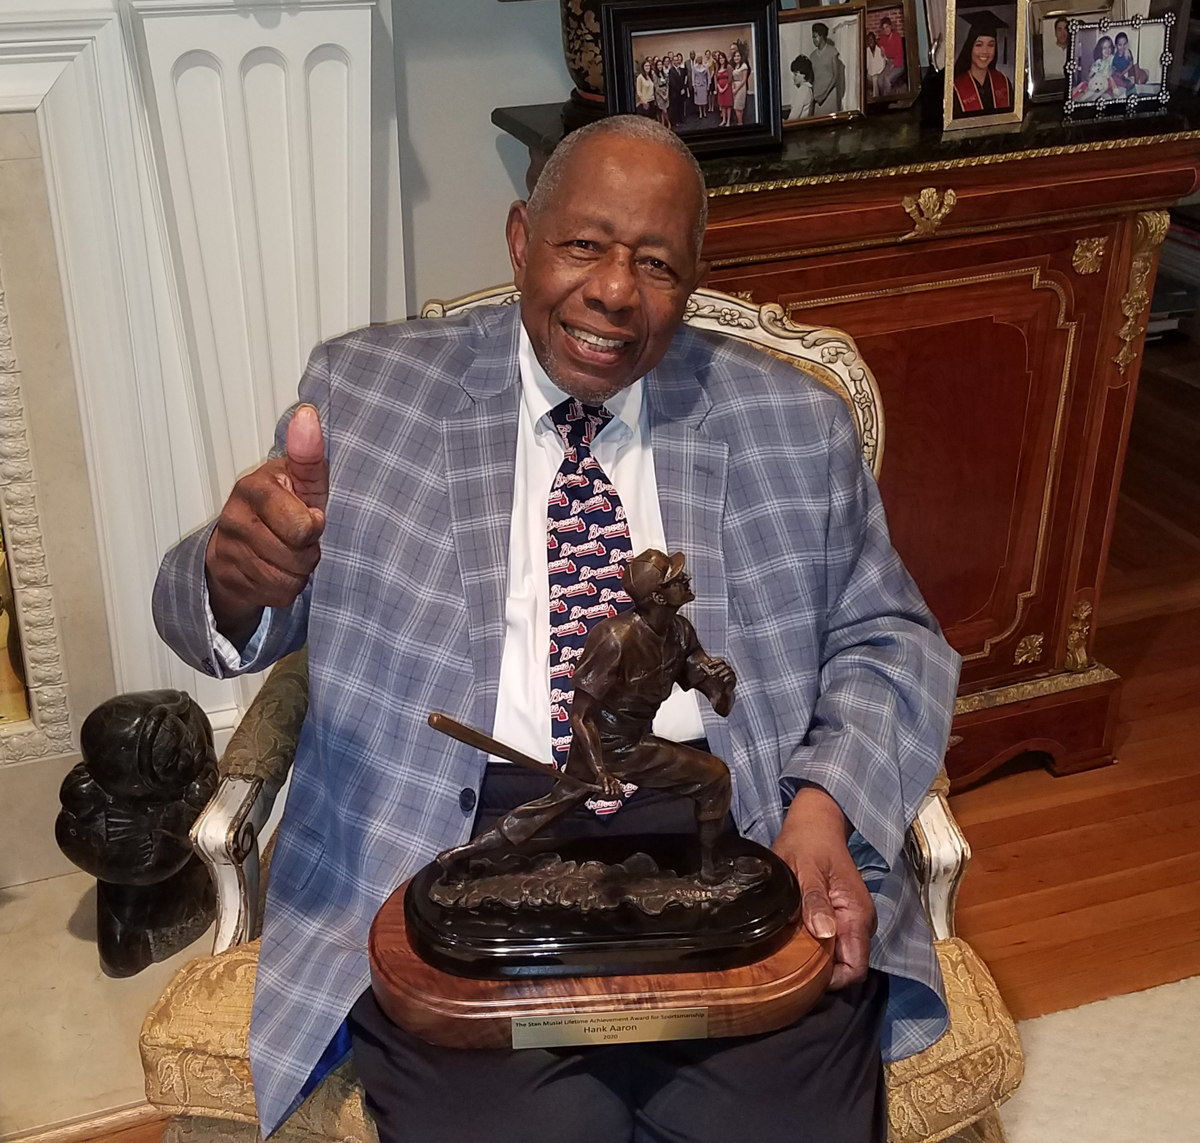 Hank Aaron cemented legacy with Brewers